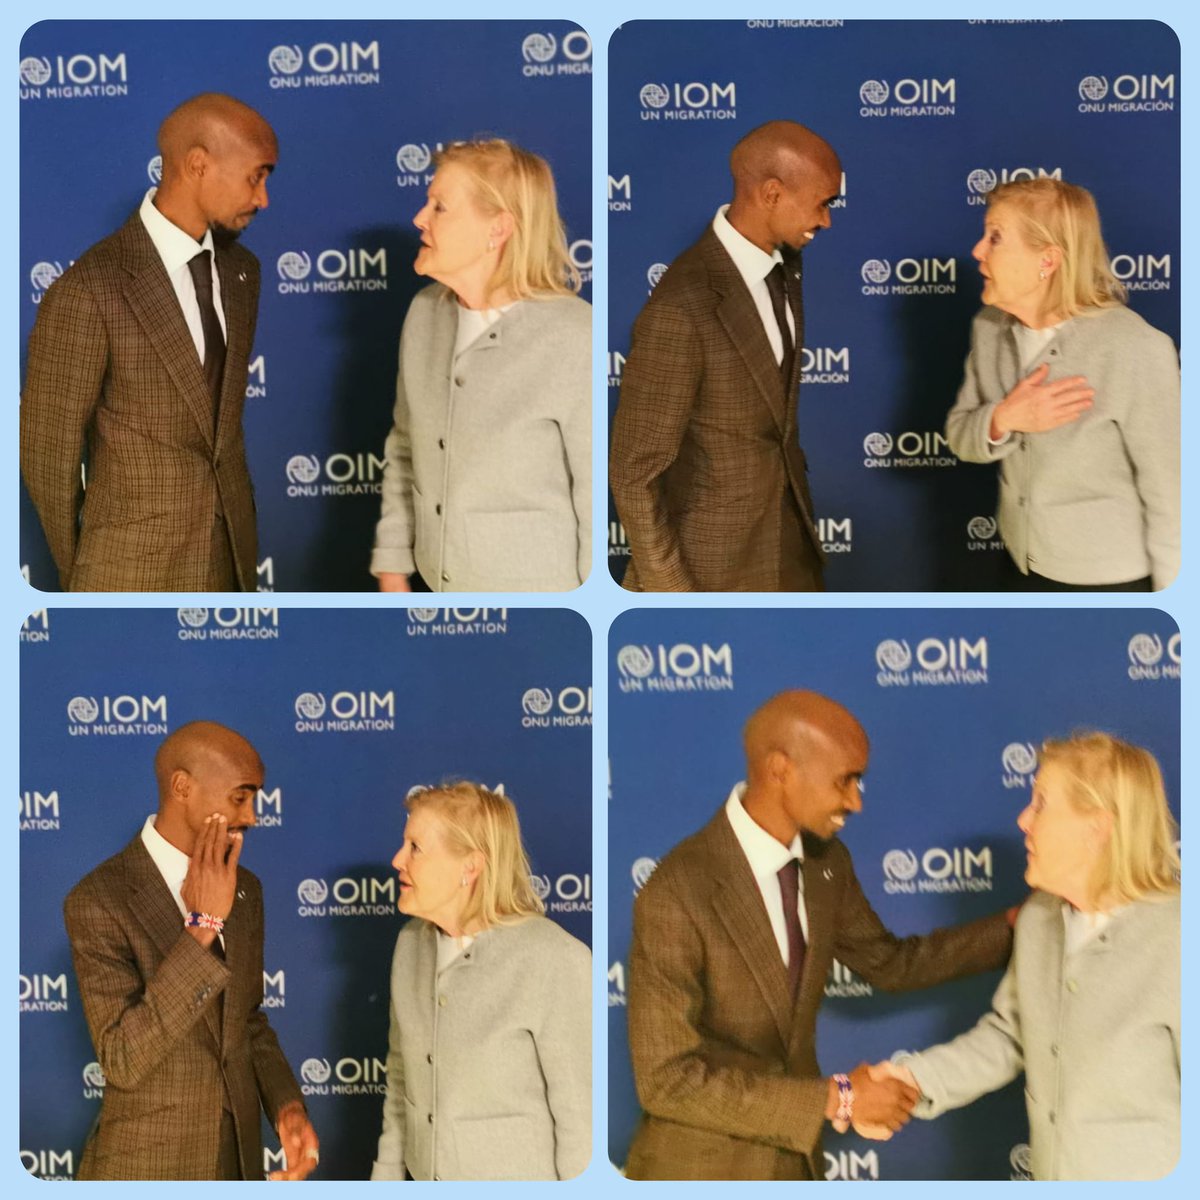 🇪🇺Ambassador Knudsen was inspired to meet the 1st @IOM Goodwill Ambassador @Mo_Farah. The 4⃣time Olympic champion was trafficked as a child from Somalia to the UK. Now he'll raise awareness of issues affecting people on the move & advocate for the transformative power of sport.👏